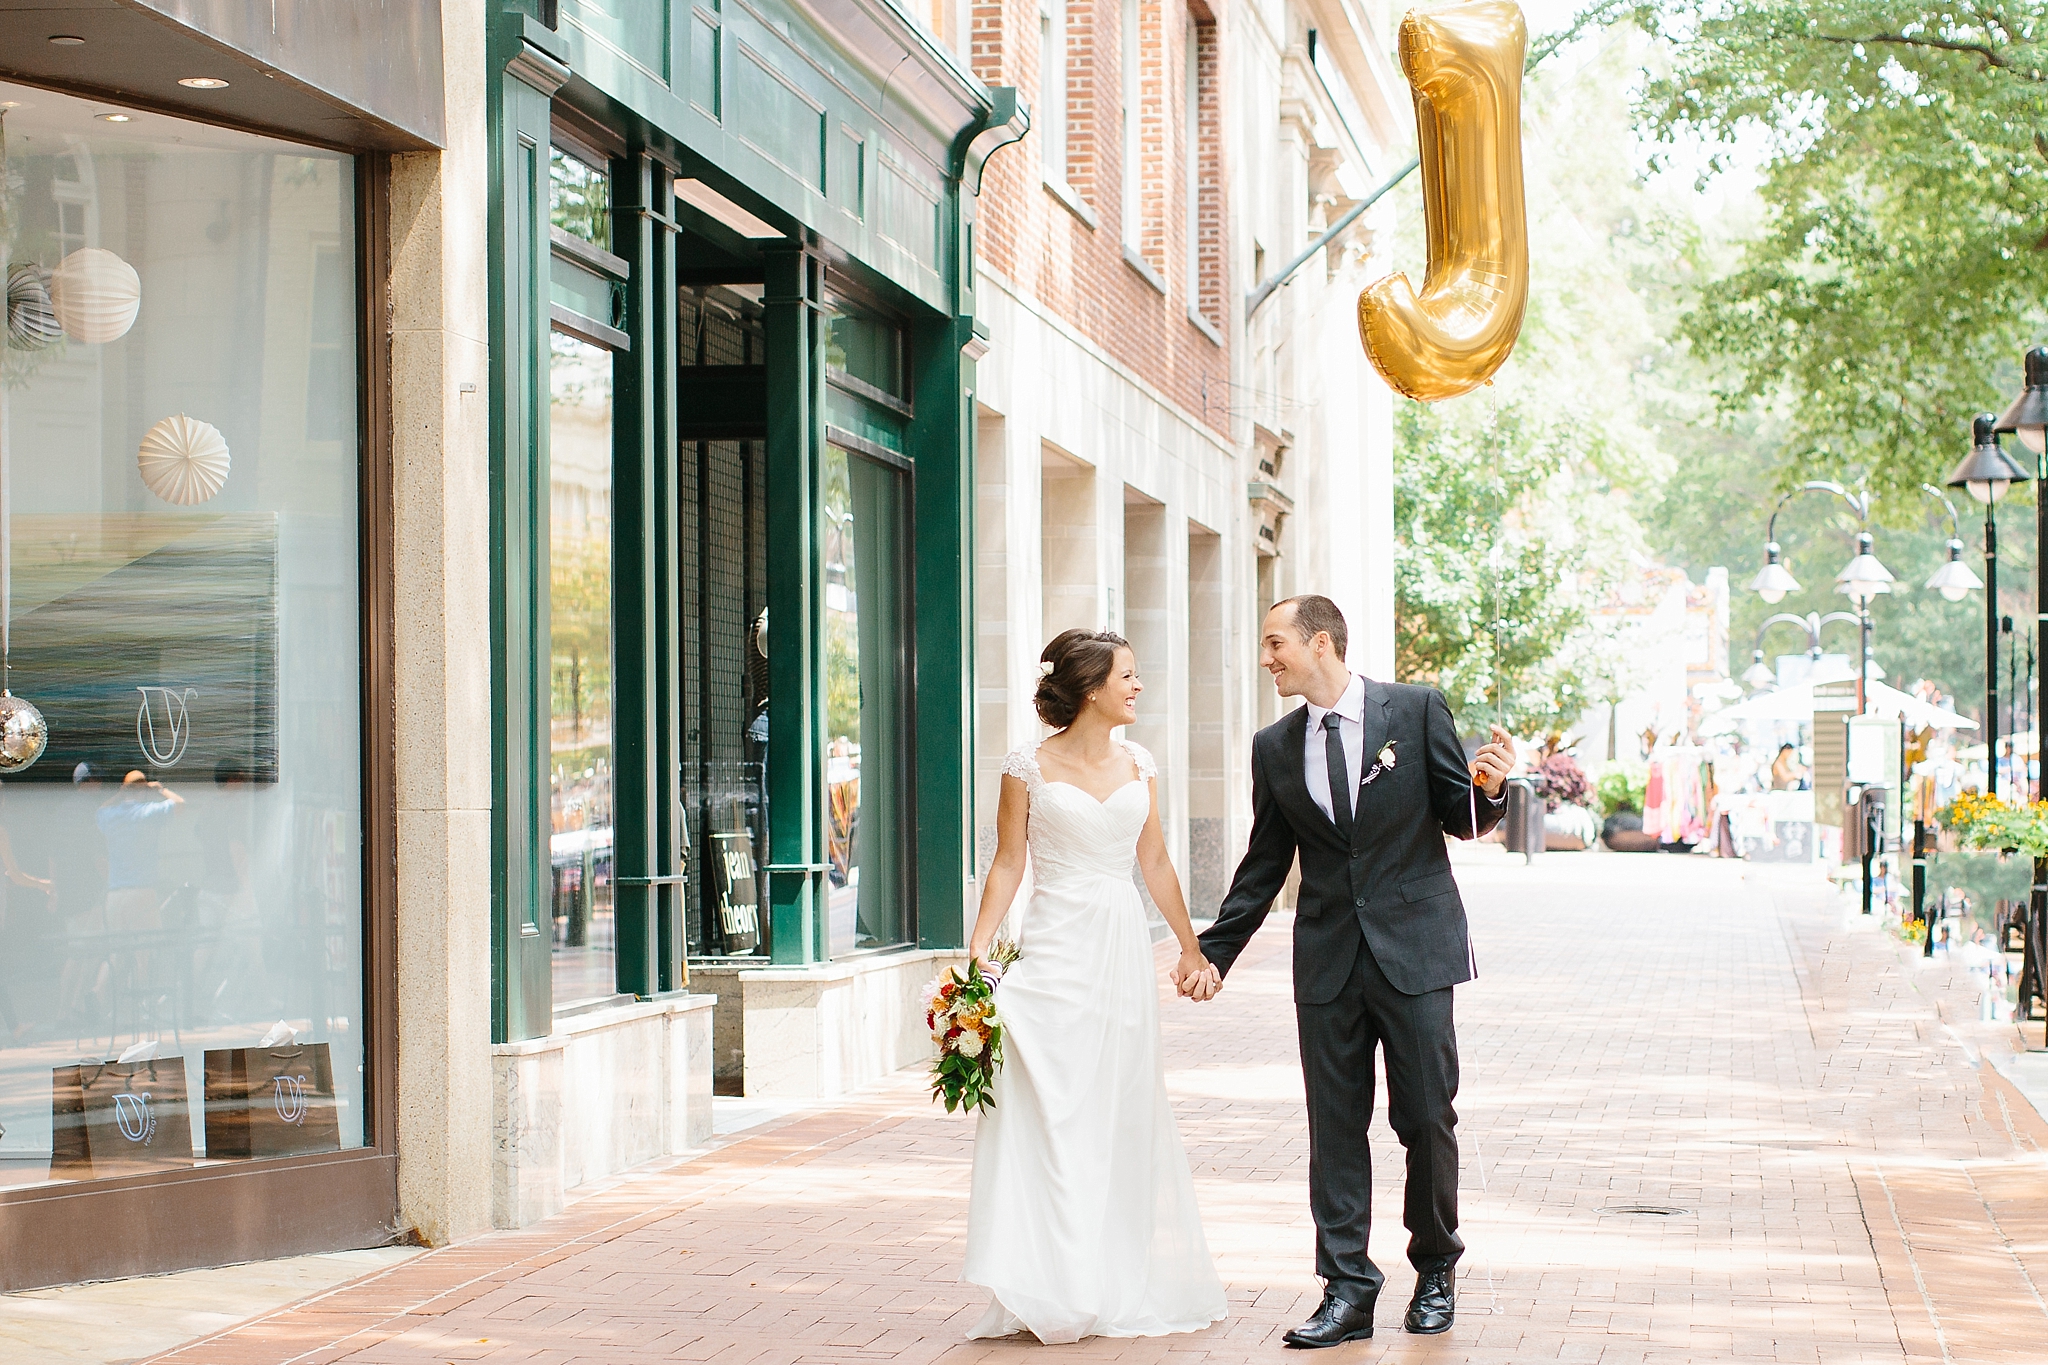 An industrial inspired wedding shoot at Old Metropolitan Hall in Charlottesville, VA -- photographed by Alicia Lacey Photography, a Washington, DC wedding photographer.